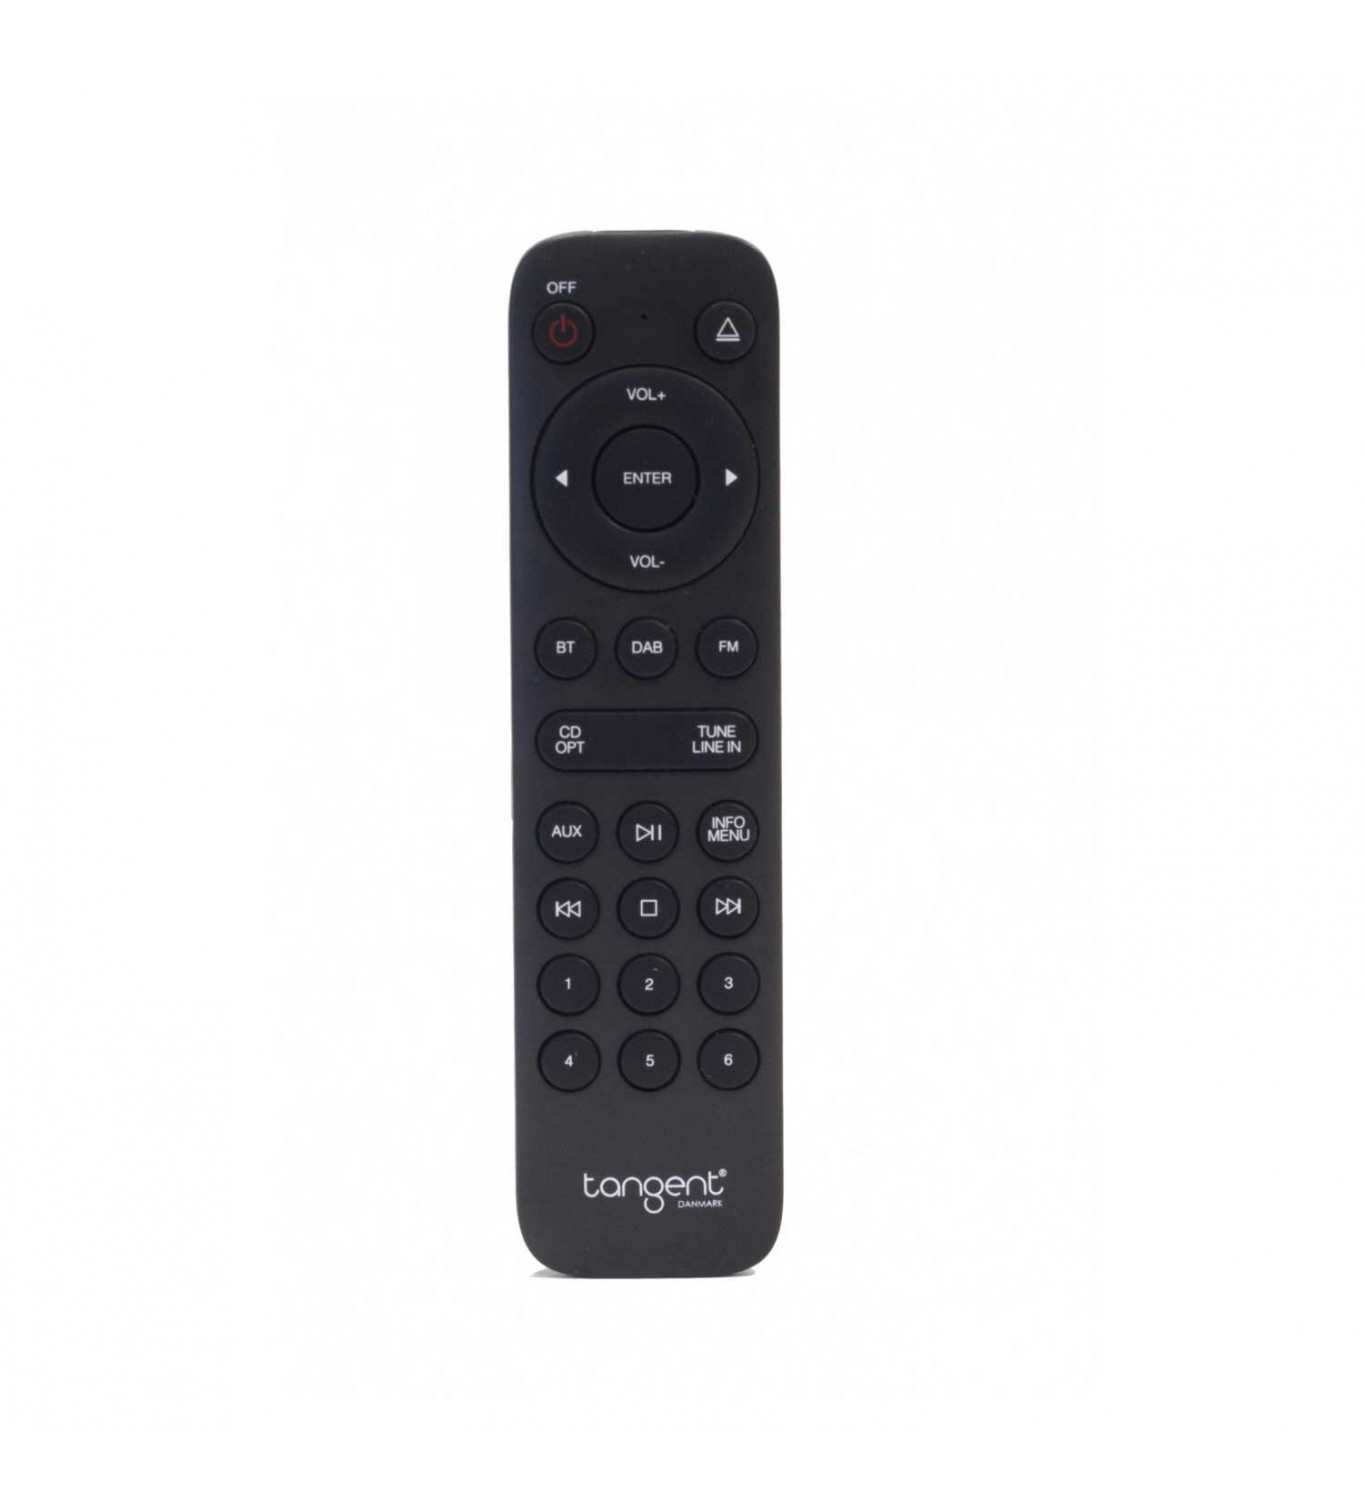 Tangent Ampster BT II remote